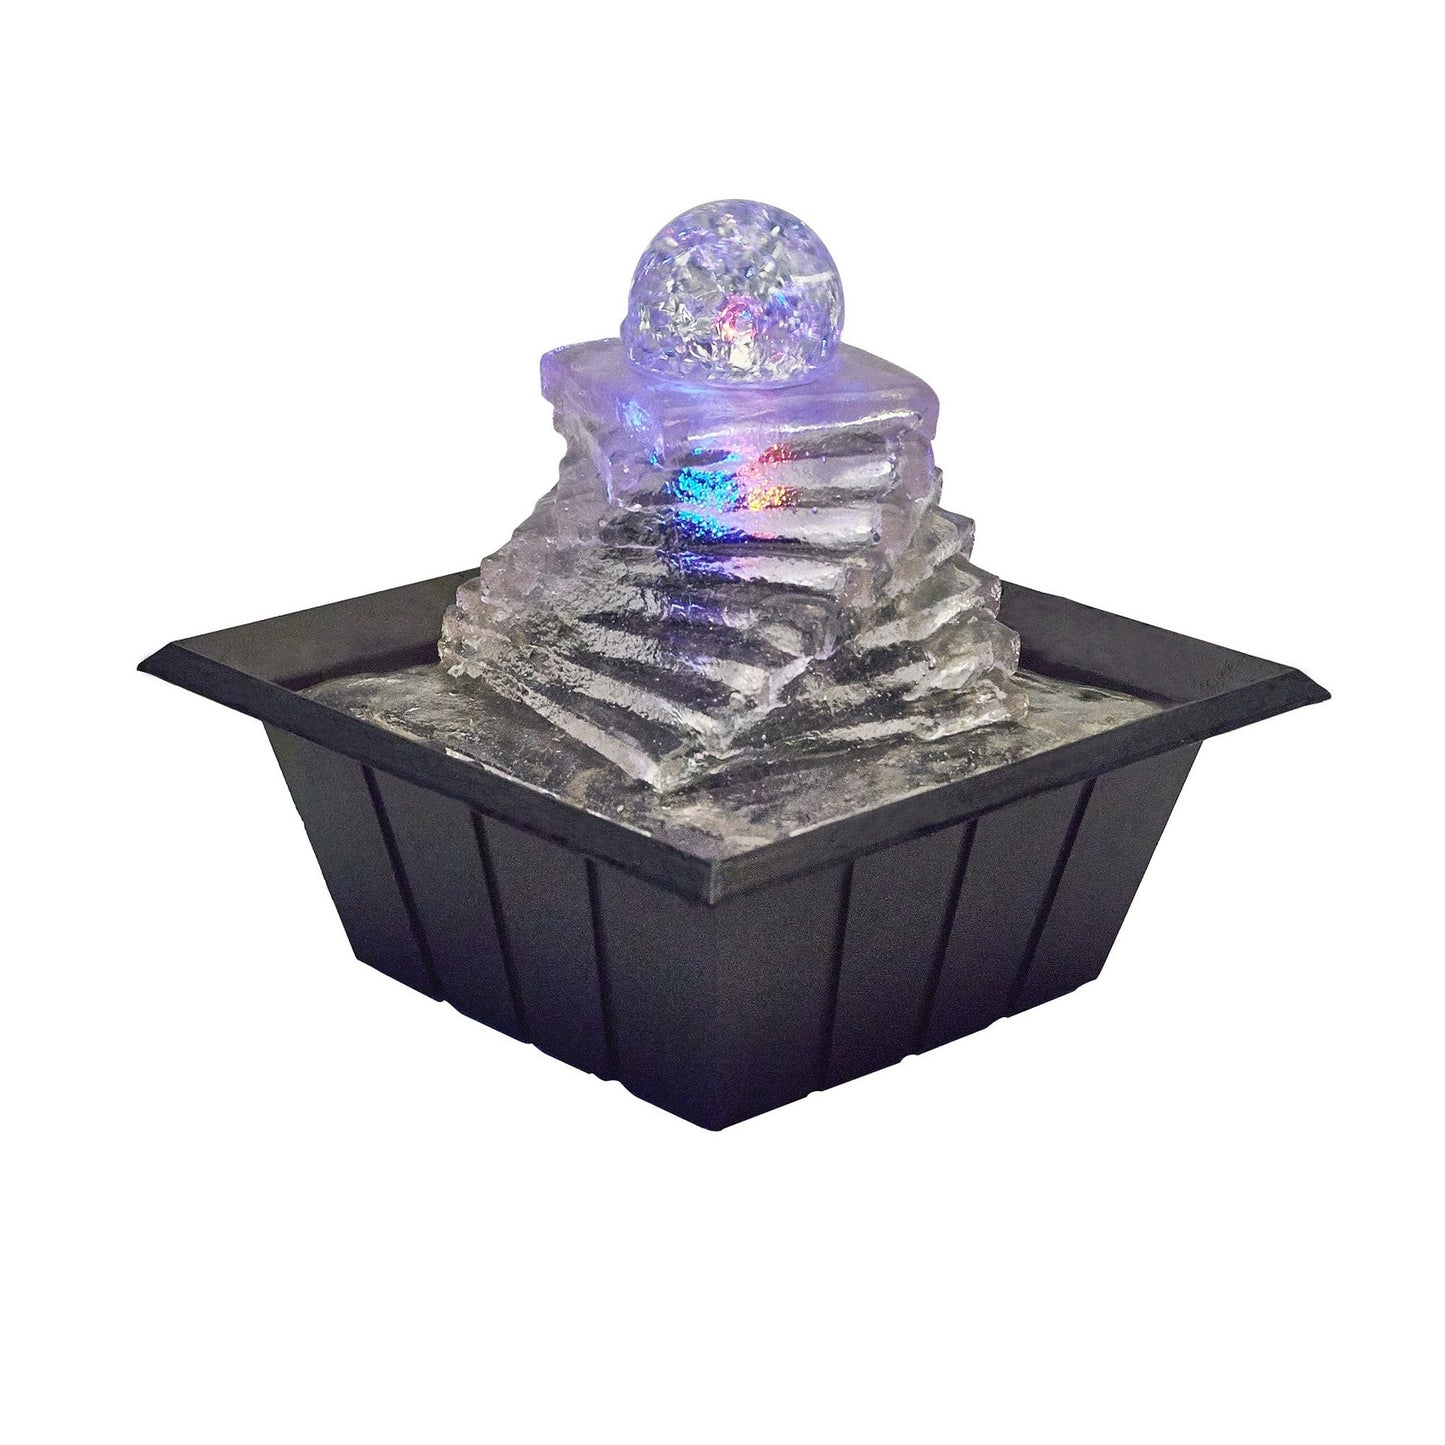 8" Clear Polyresin Ice Design Tabletop Fountain With LED